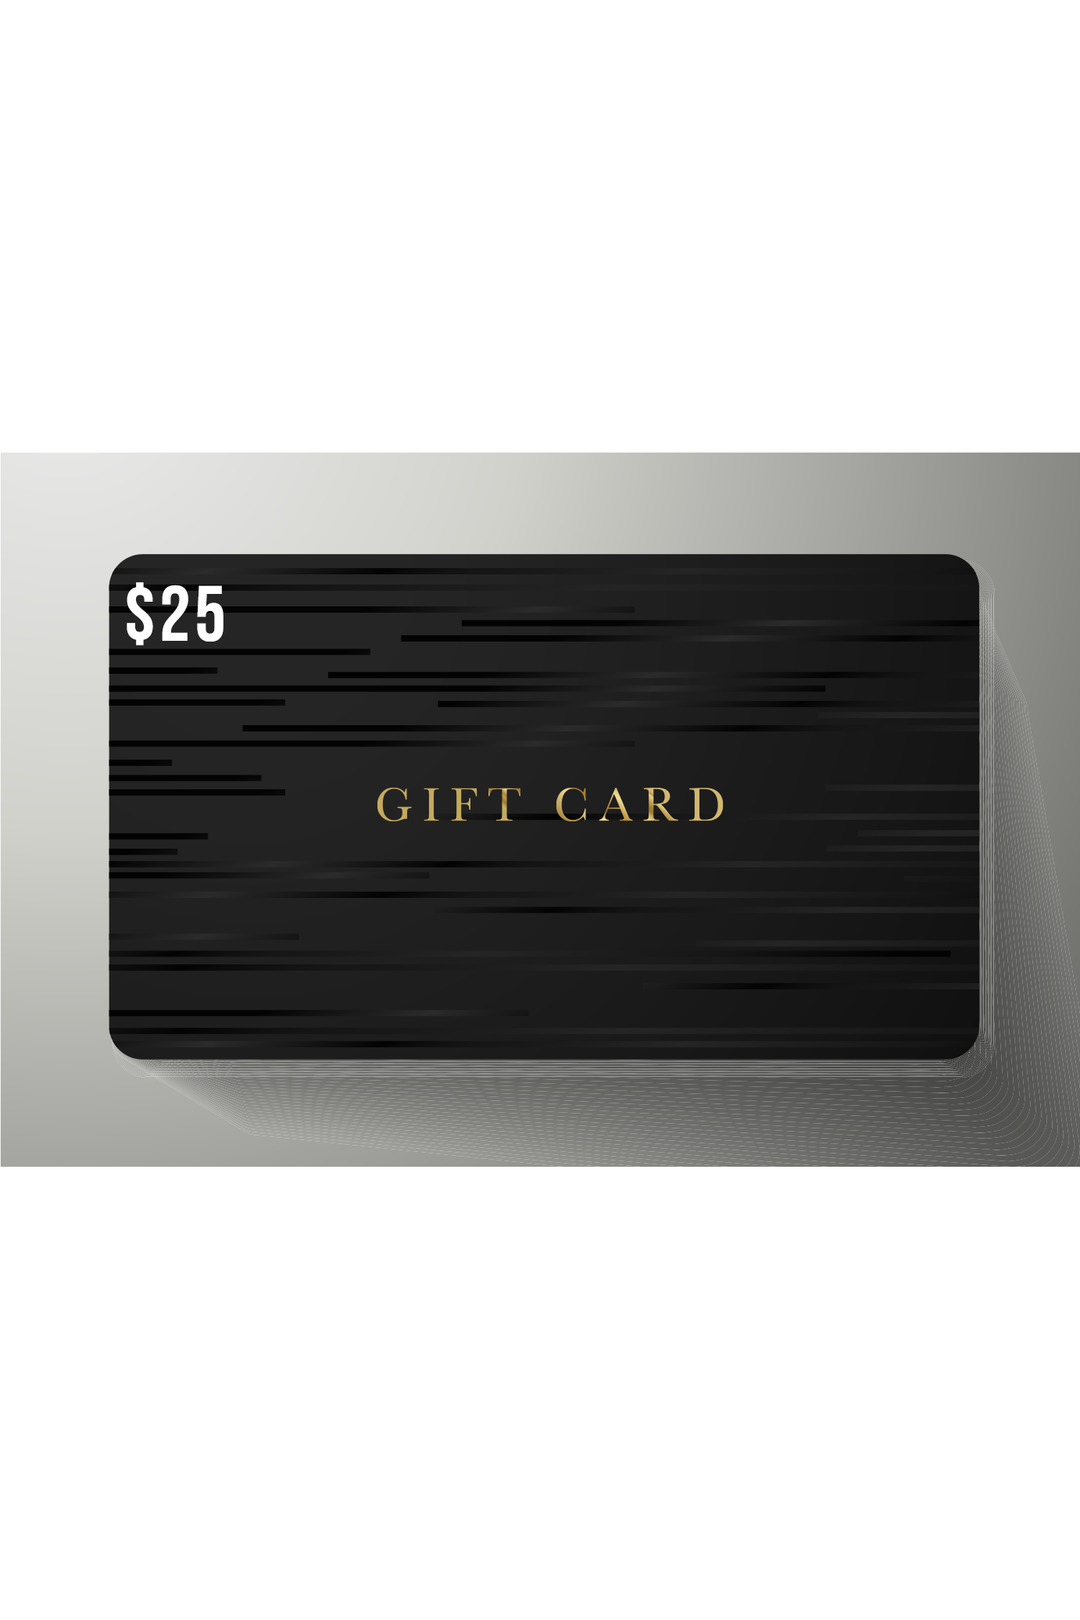 Wisher Giftcard - The SWL Store 